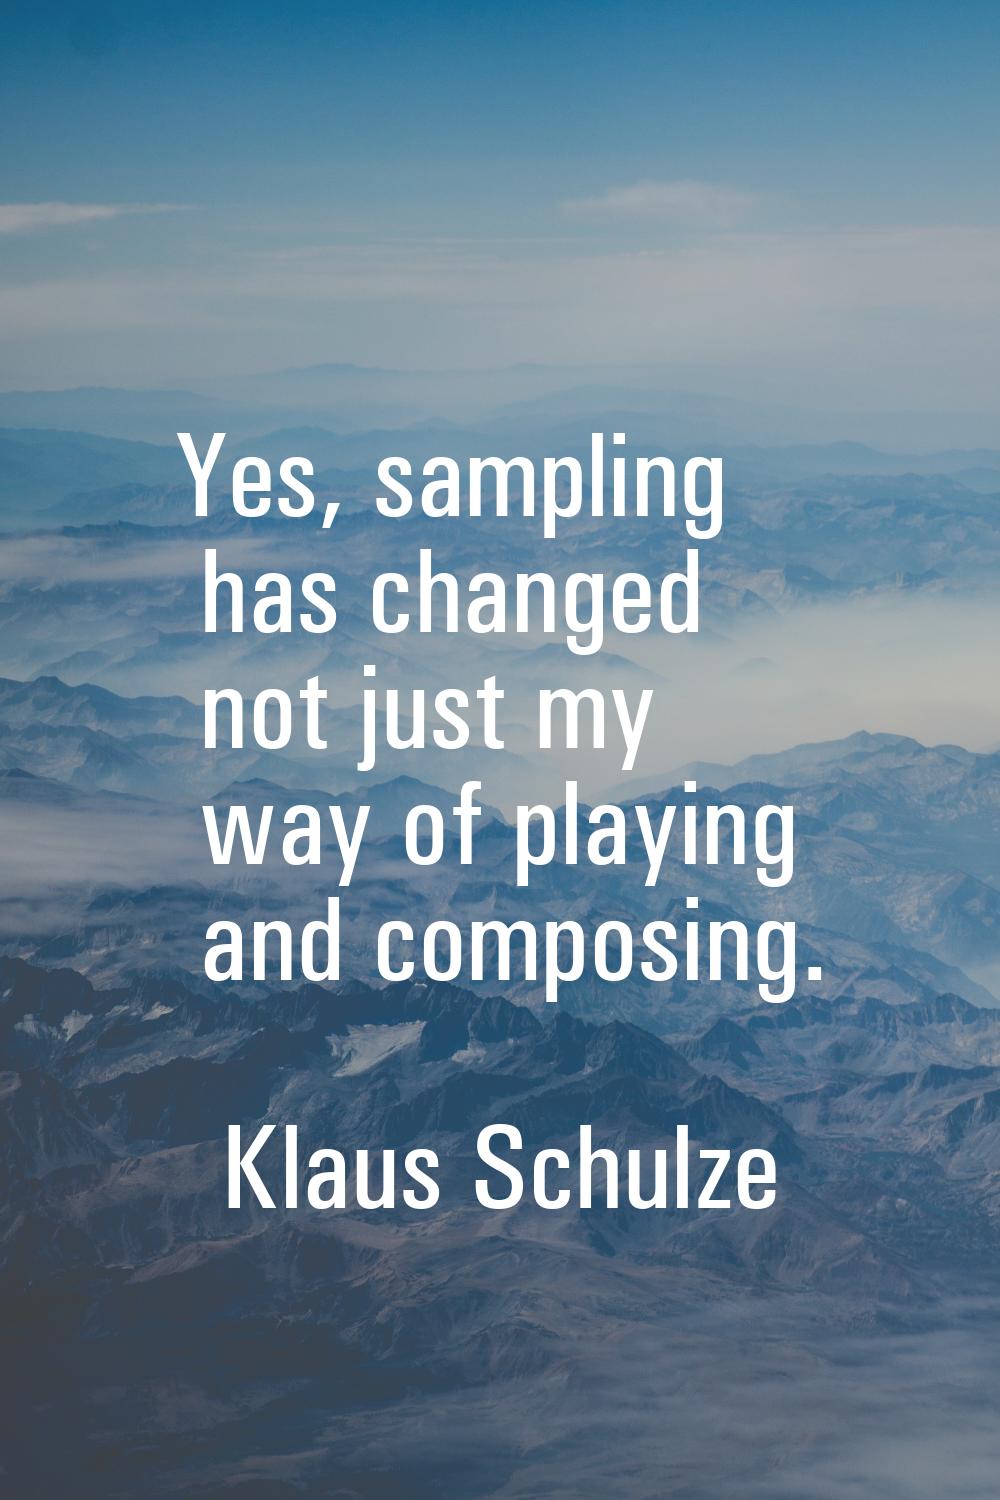 Yes, sampling has changed not just my way of playing and composing.